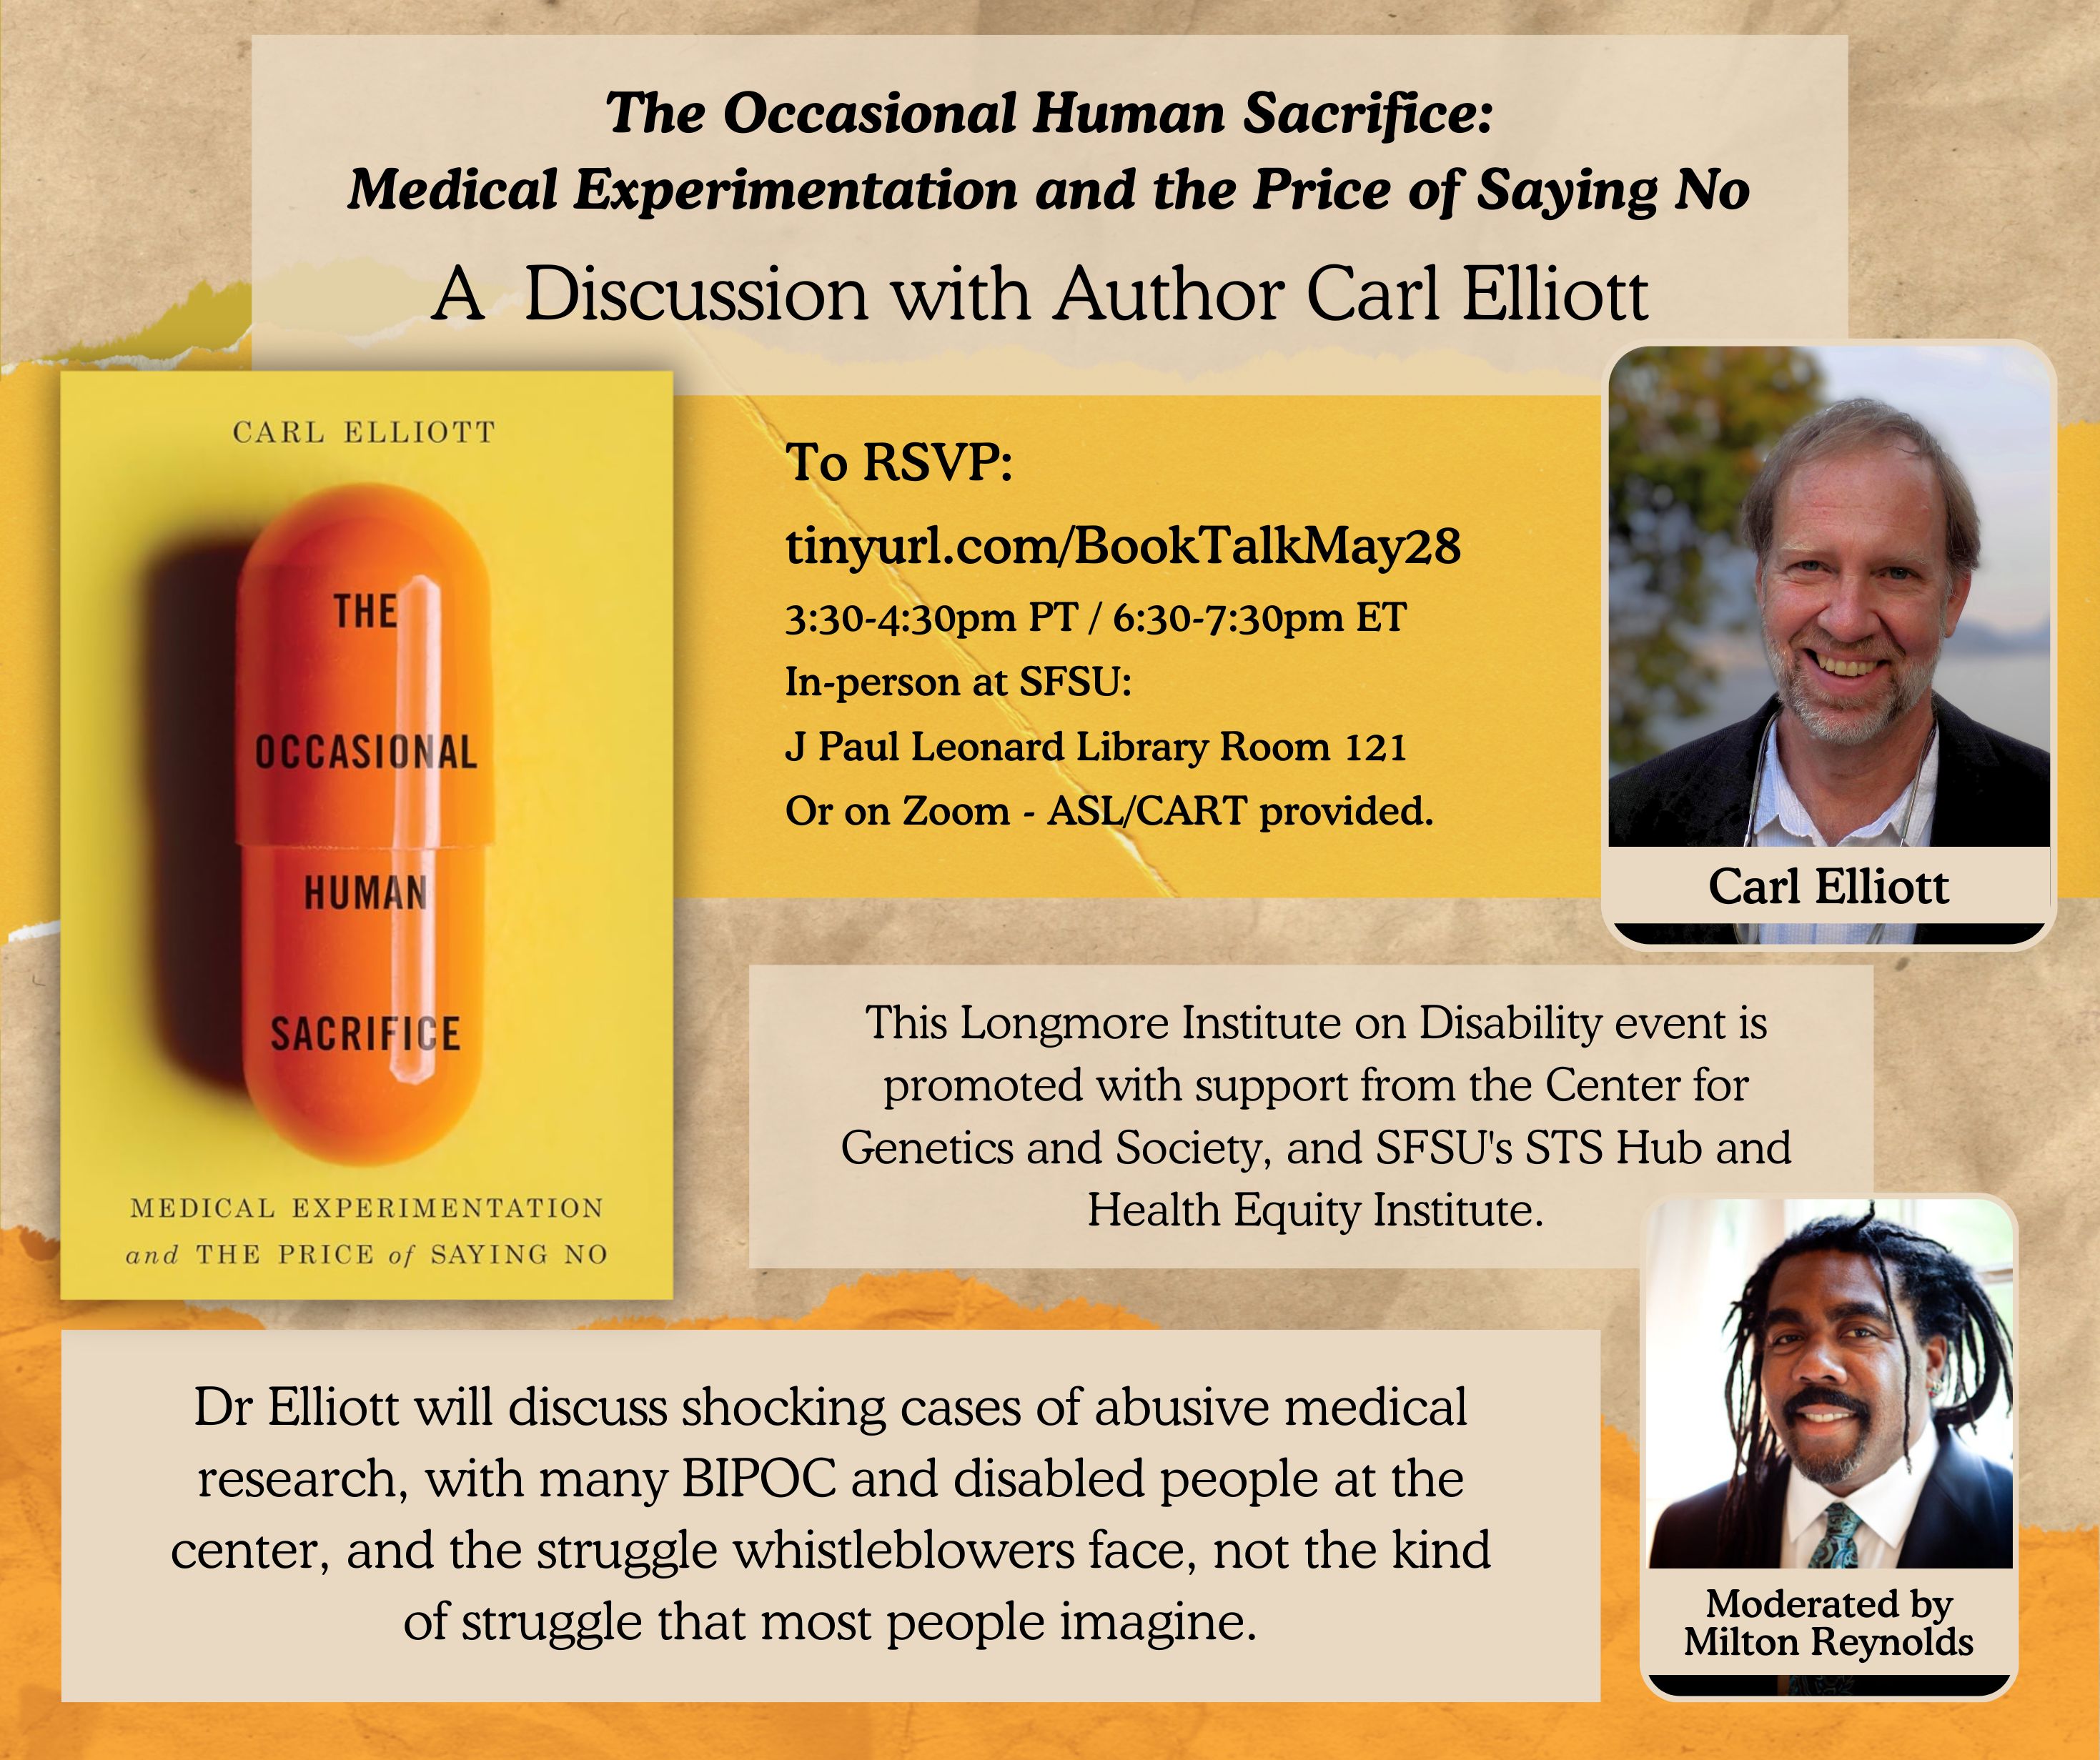 A beige and yellow flyer with black text. The header reads The Occasional Human Sacrifice: Medical Experimentation and the Price of Saying No, A Discussion with Author Carl Elliott. Below the header is a yellow book cover with a large orange pill casting a dramatic shadow. The text has the author's name at the top, and then the title, which is the same as the flyer header, is overlaid on the orange pill. A block of text that reads: RSVP: tinyurl.com/May28BookTalk